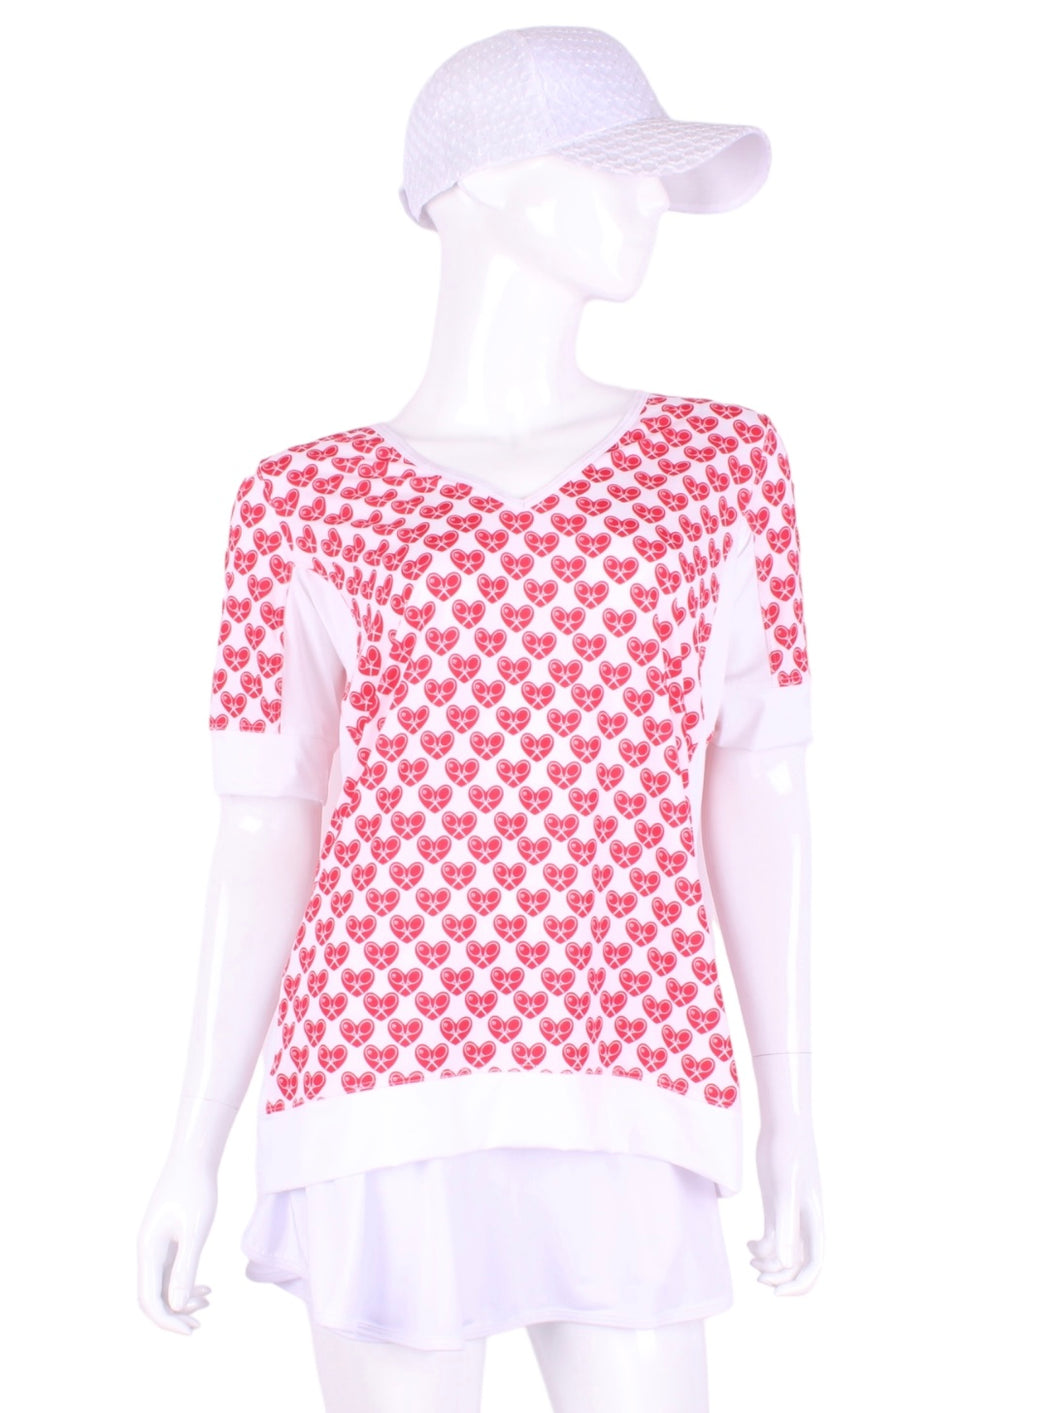  The very comfortable Baggy Vee Tee is so cool and easy to wear.  For the lady that likes a little room when she plays - the feminine top is flowing in the air.  This Mini Hearts on a white background has a white stripe down the sides, hem, collar, and cuff.